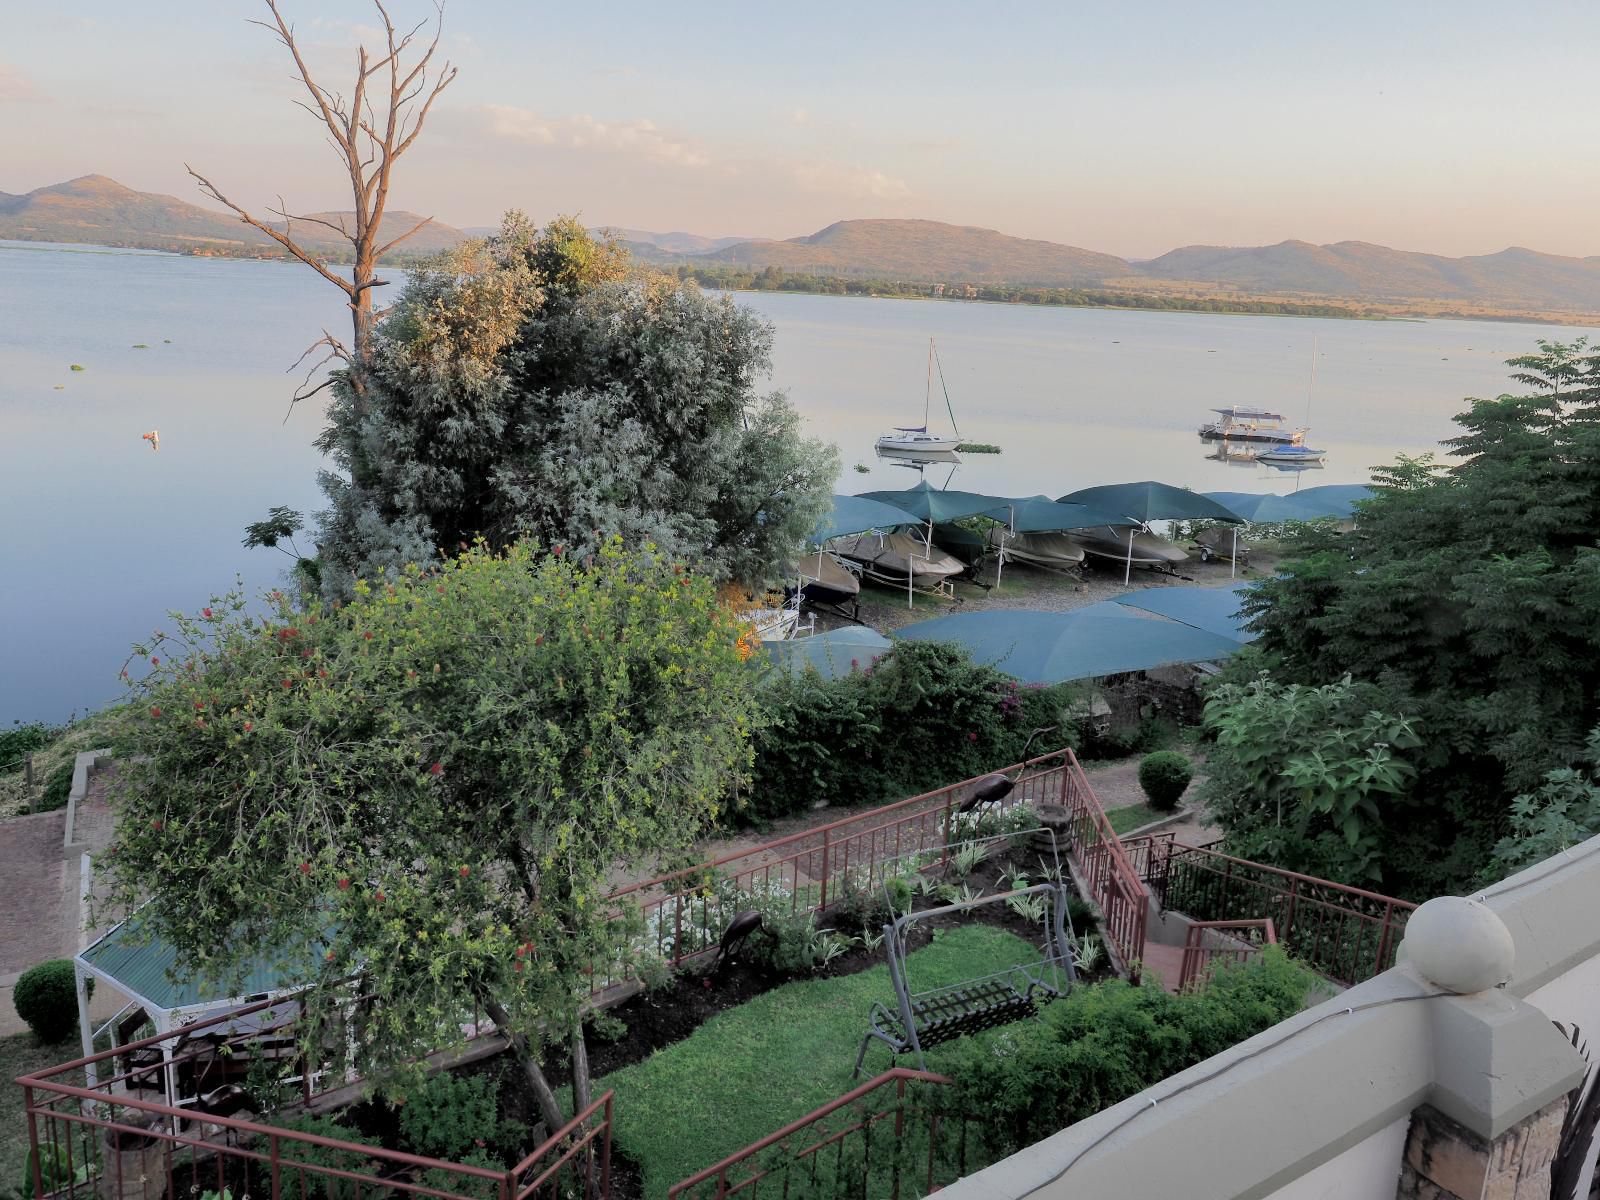 Kosmos Manor Guest House Hartbeespoort Dam Hartbeespoort North West Province South Africa Boat, Vehicle, River, Nature, Waters